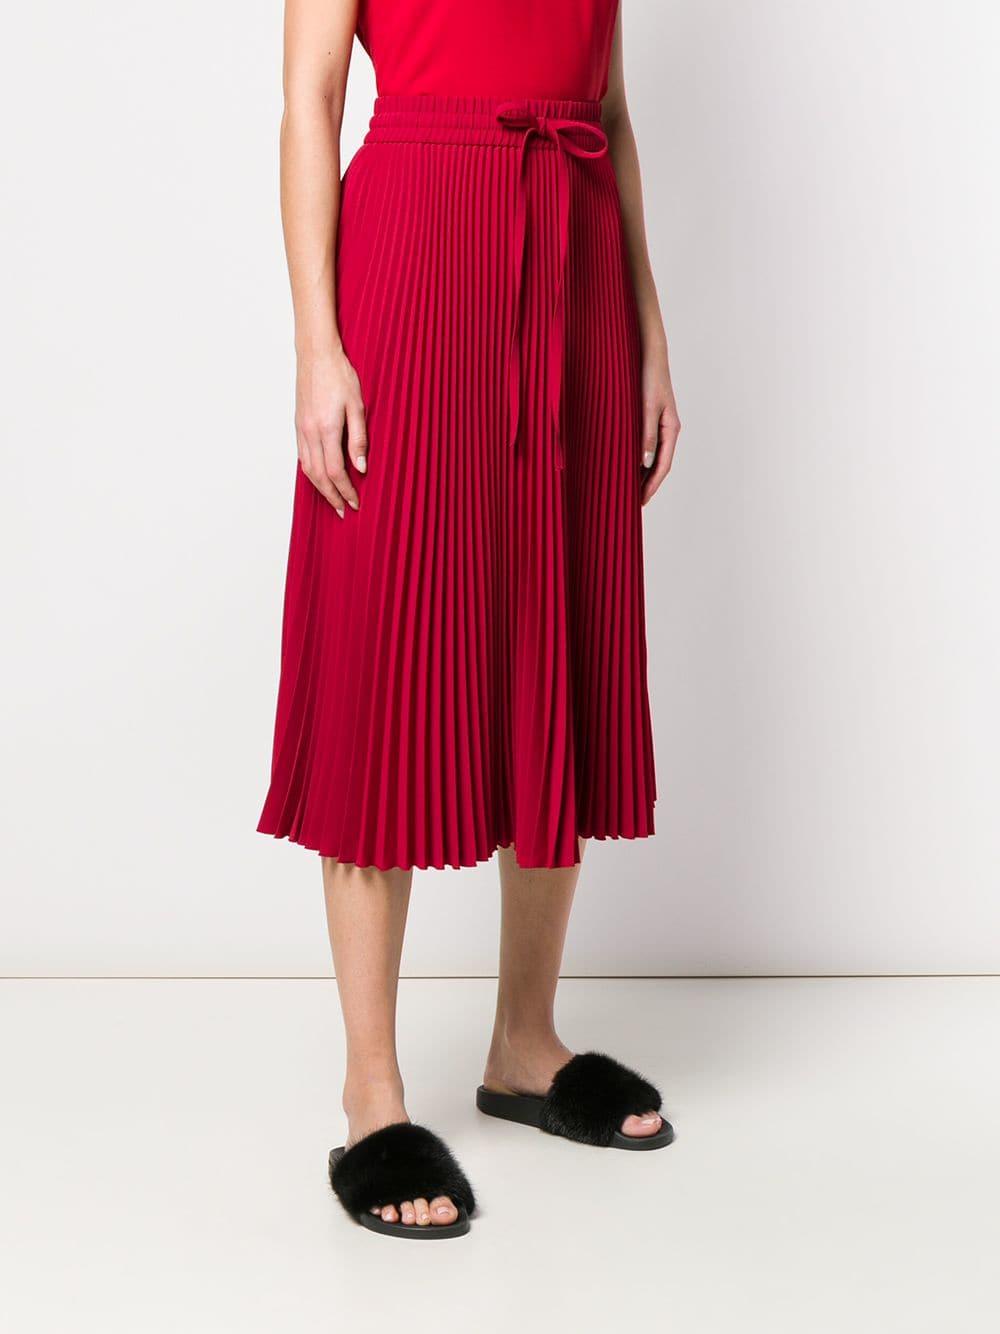 Lyst - RED Valentino Pleated Midi Skirt in Red